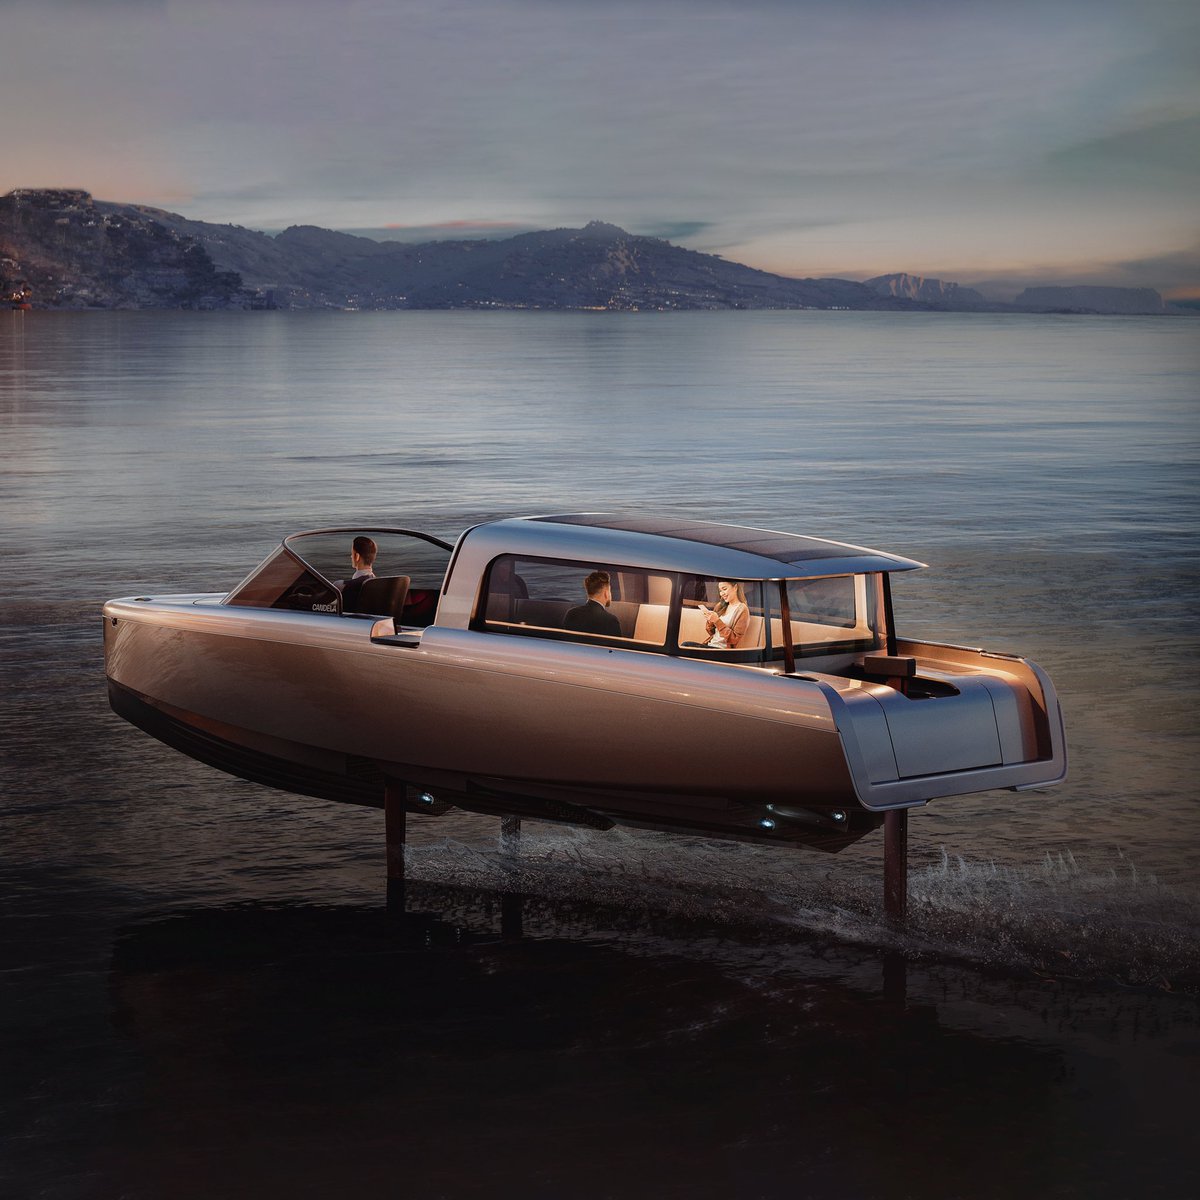 Designed to be the quietest on the market, the P-8 Voyager cabin provides a peaceful environment for 6 passengers. Even in rough conditions and at high speeds. #ev #ElectricVehicles